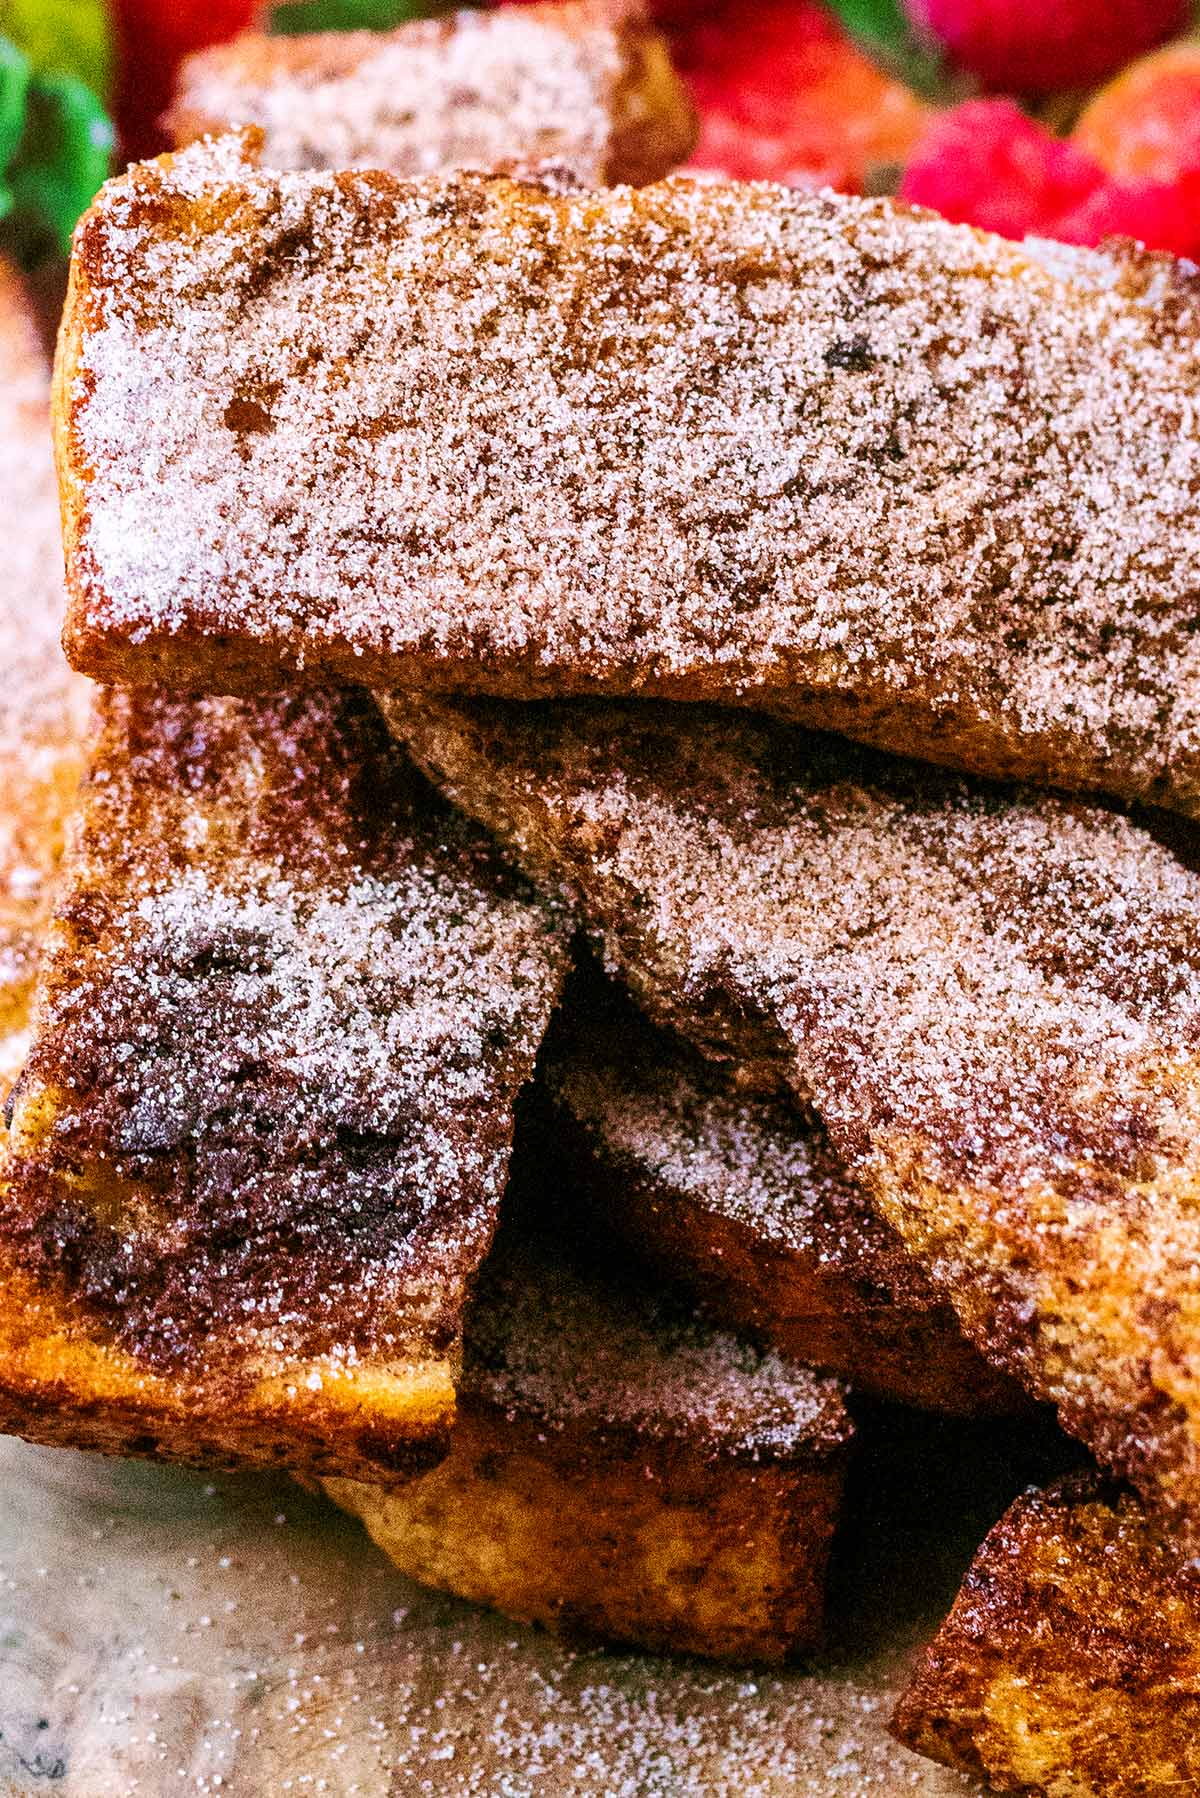 Slices of French toast topped with cinnamon and sugar.